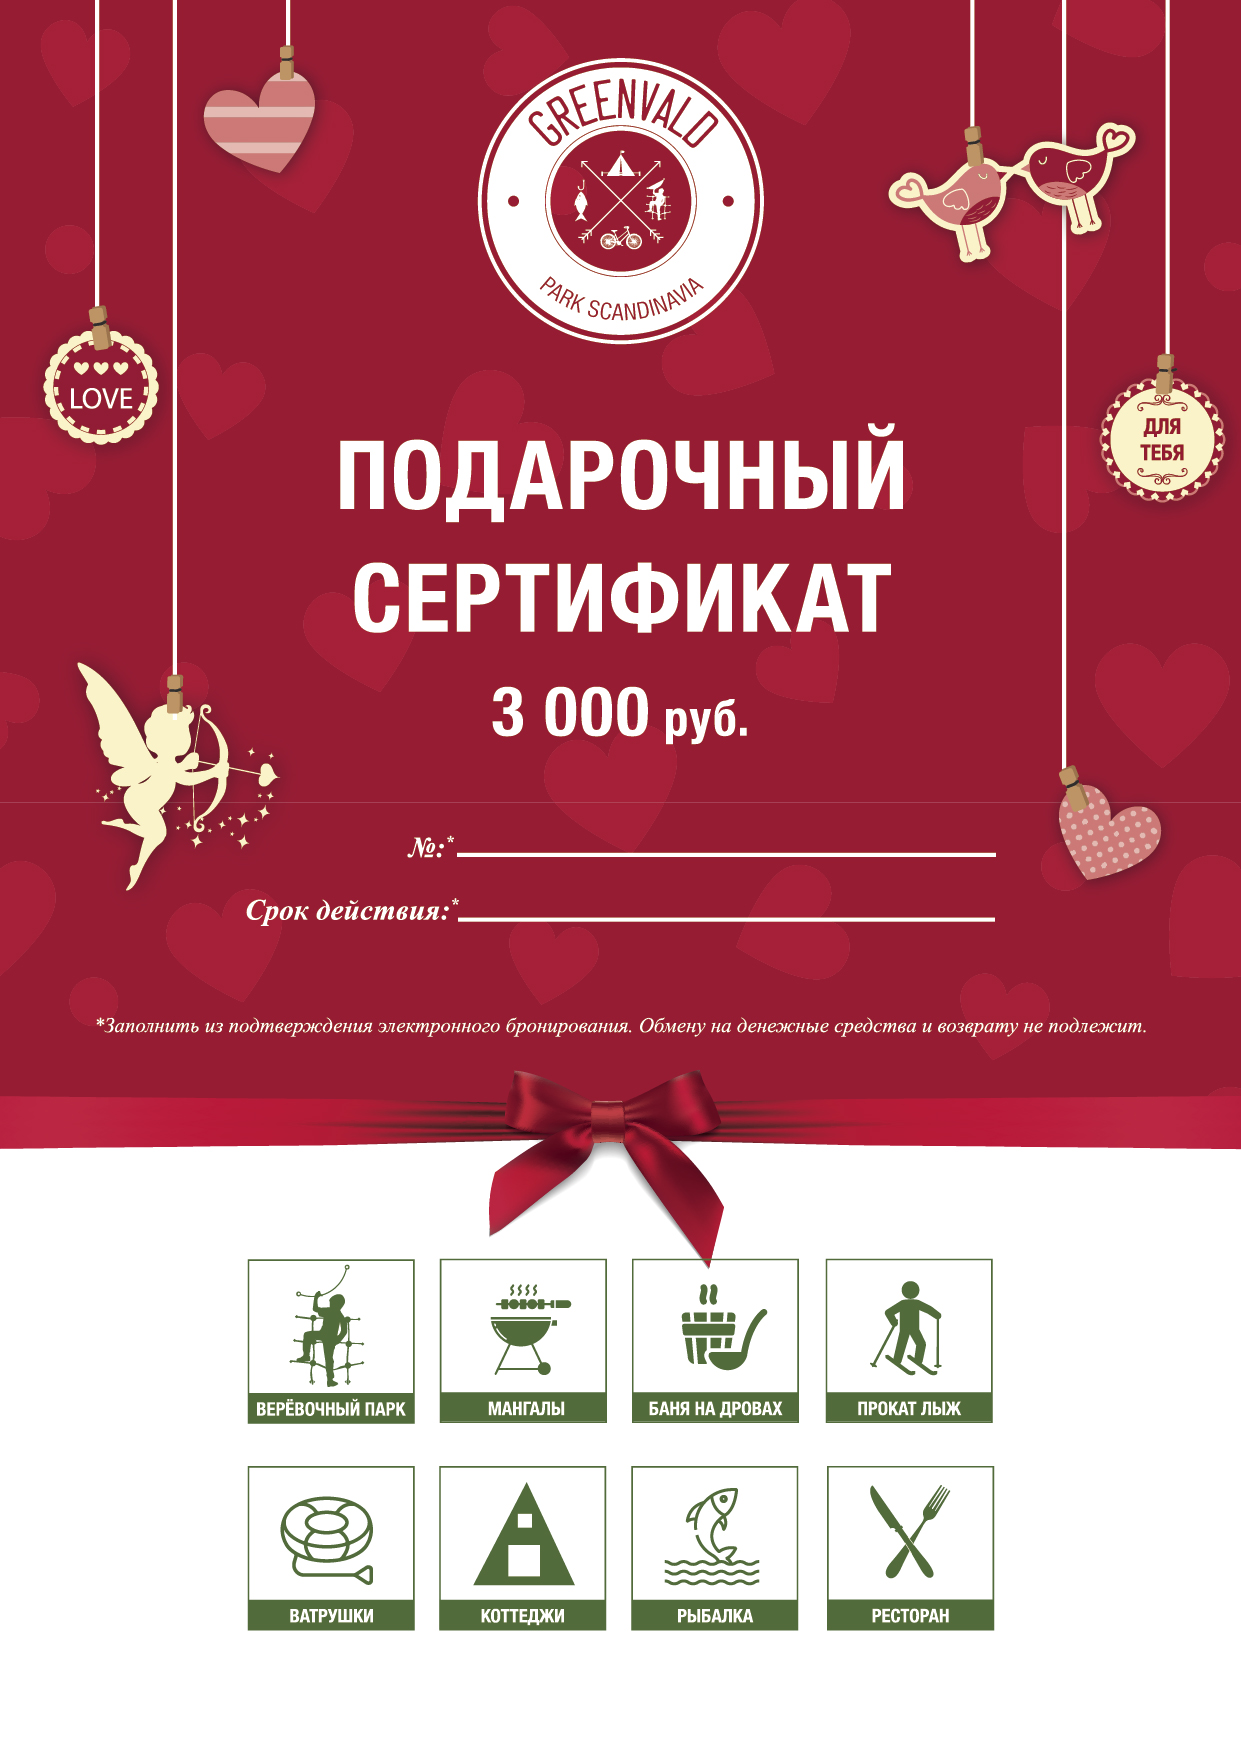 Gift card image